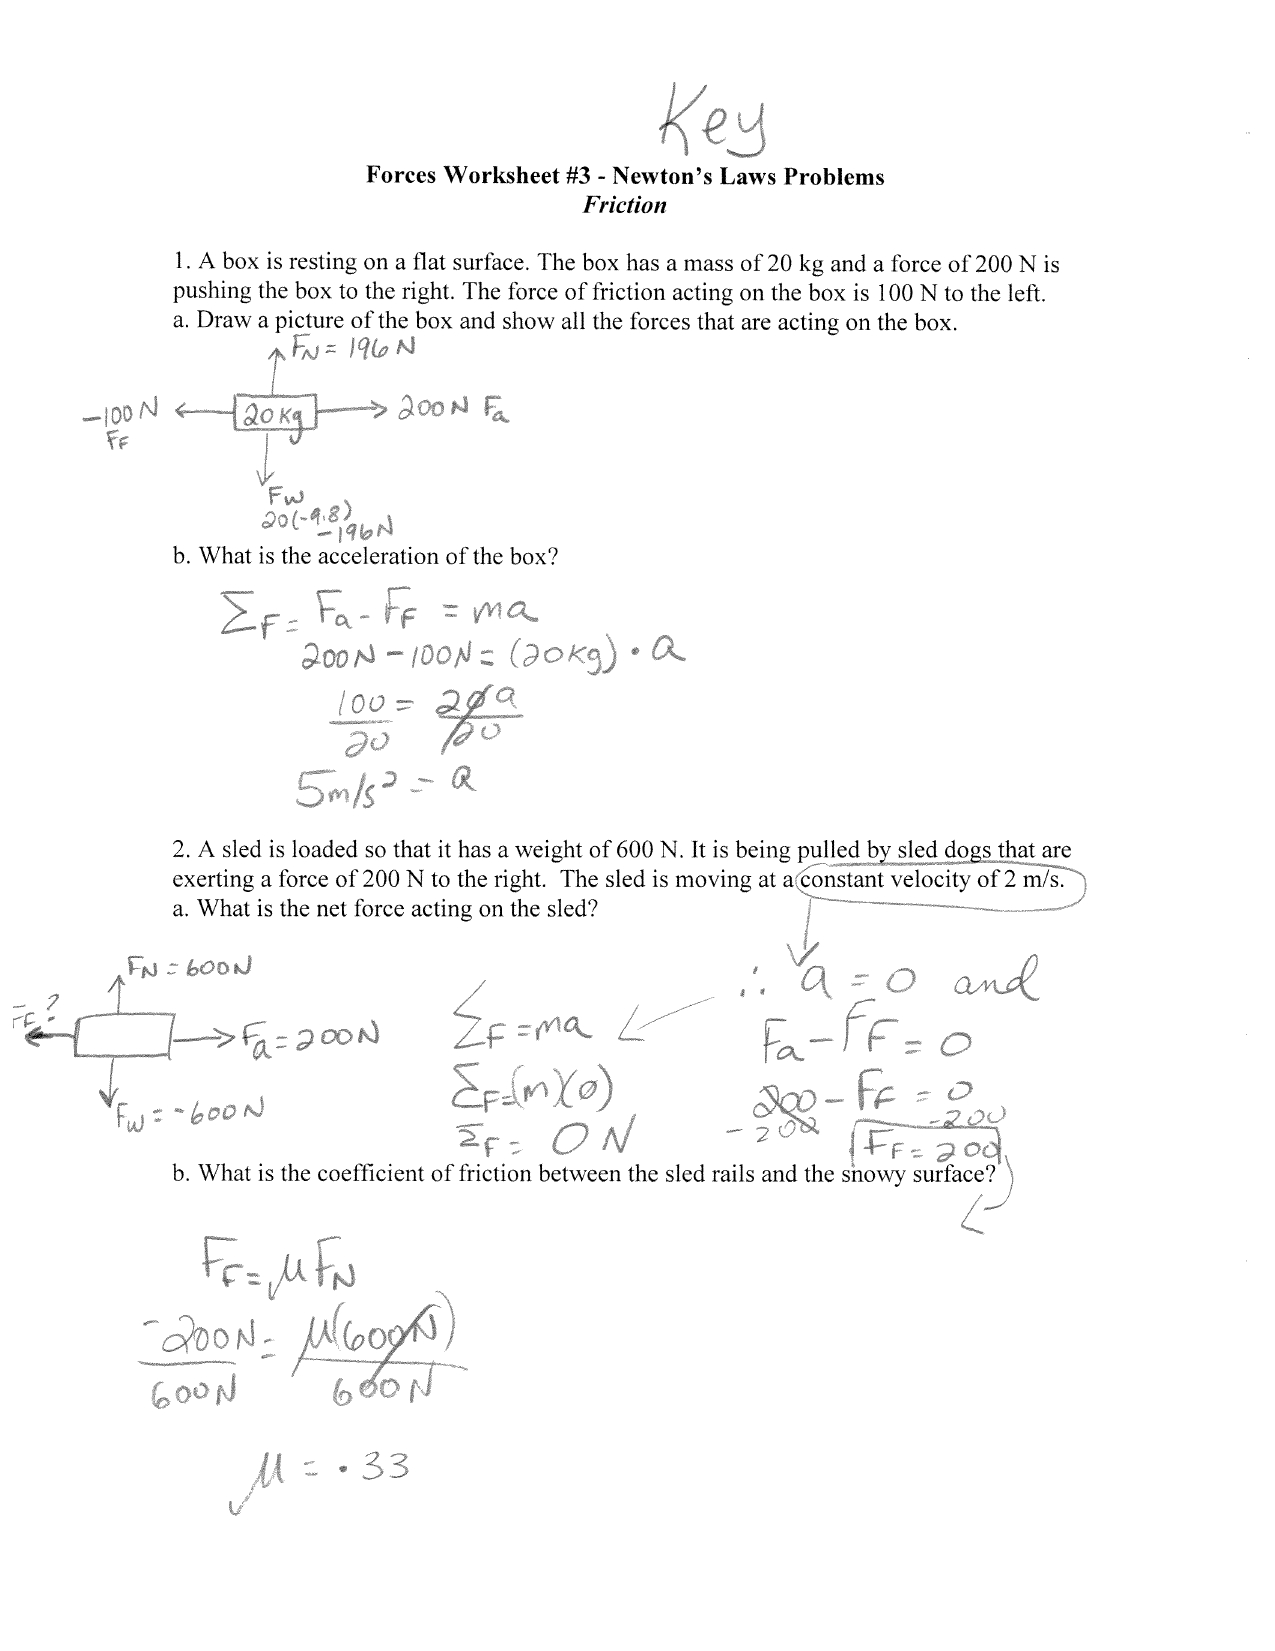 Friction Worksheet Answer Key Along With Coefficient Of Friction Worksheet